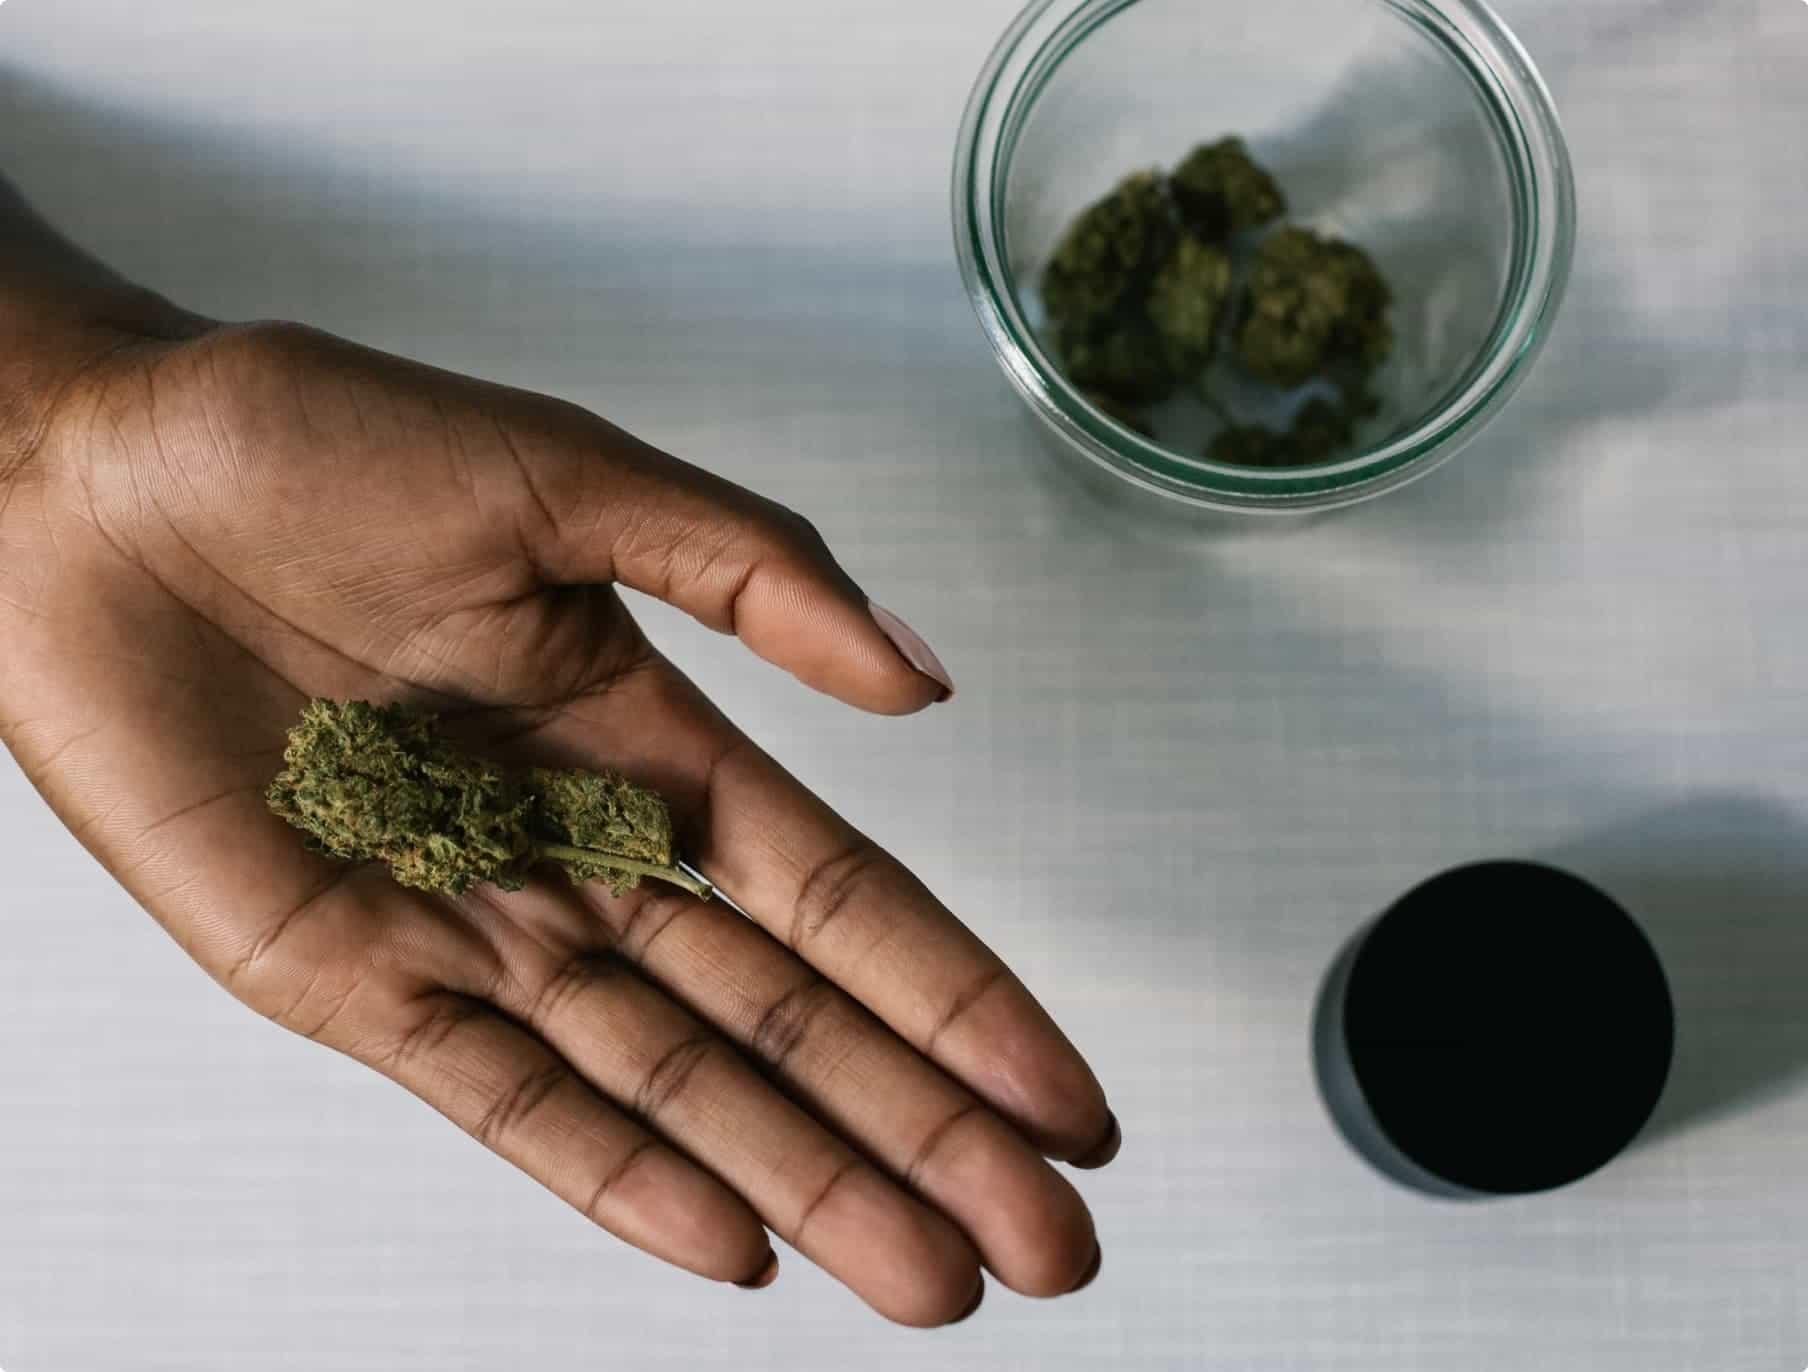 Dried cannabis in a woman's outstretched hand